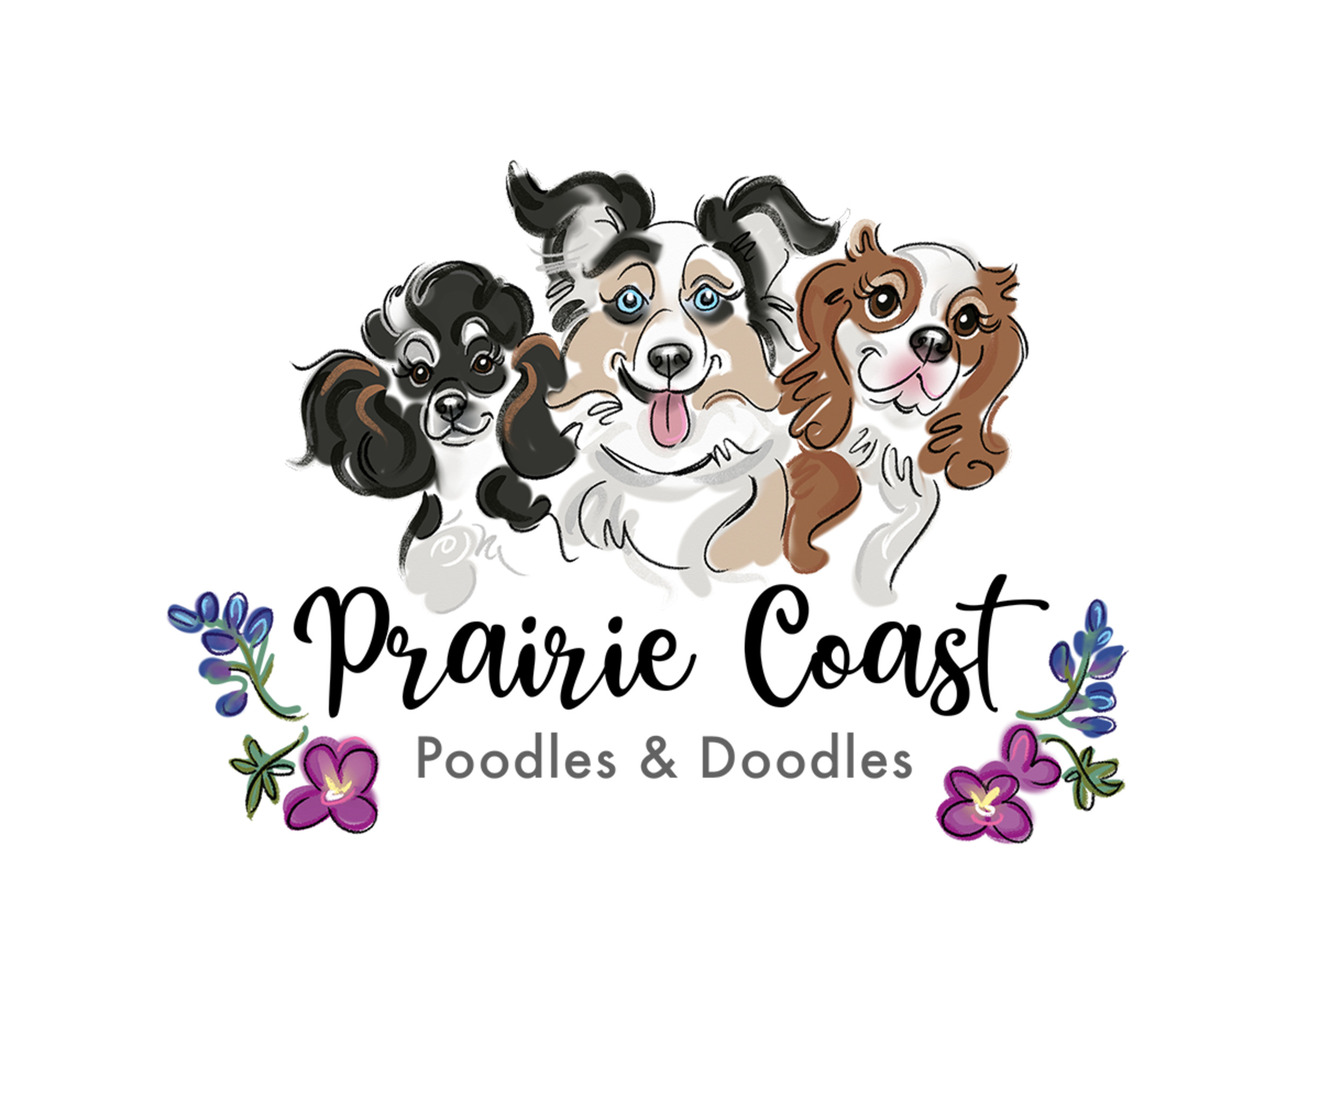 Logo for Prairie Coast Poodles and Doodles